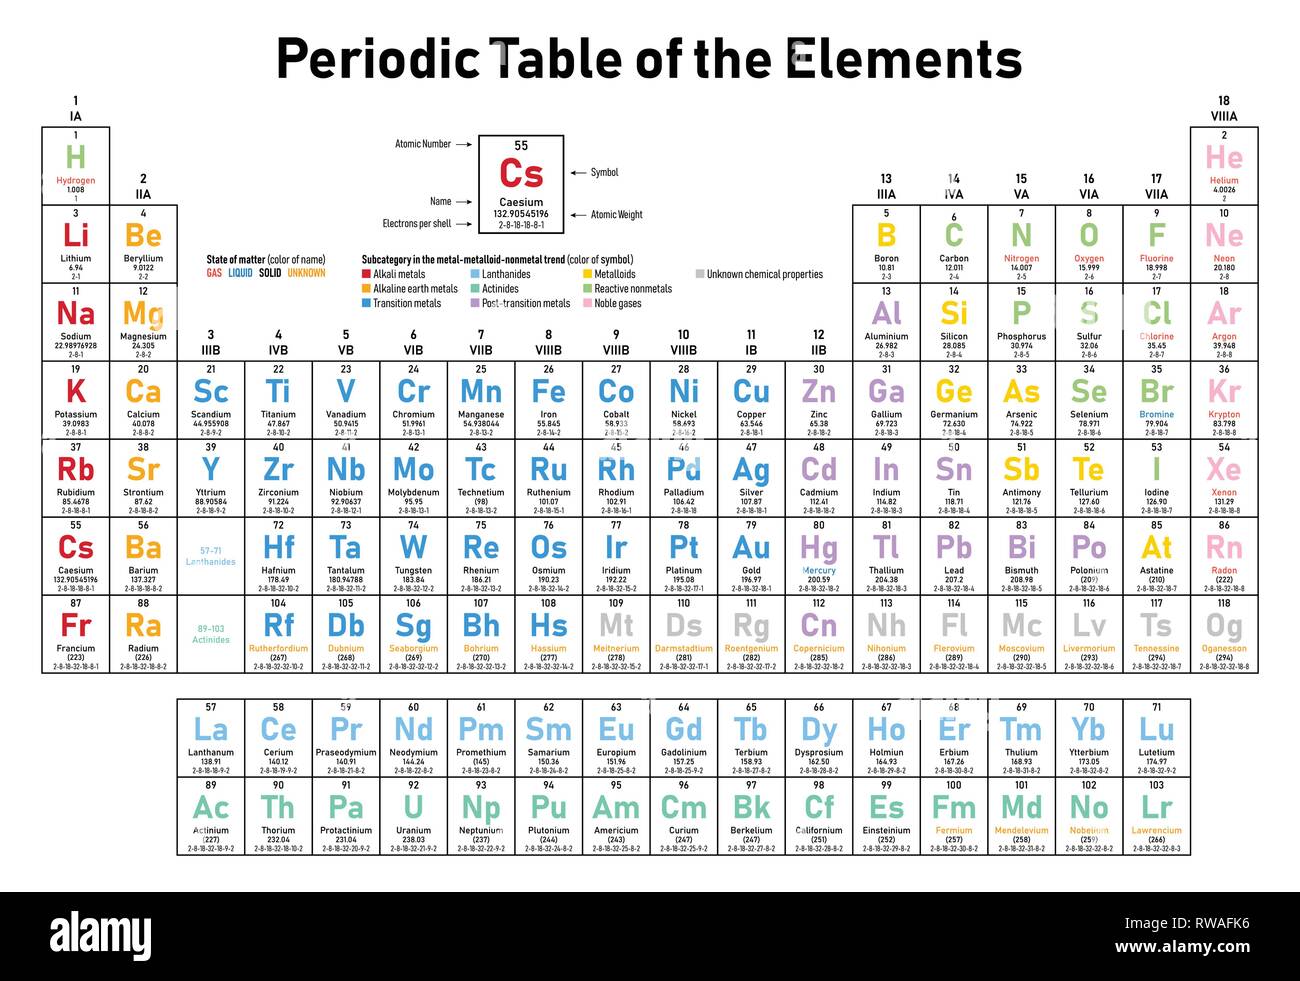 Colorful Periodic Table of the Elements - shows atomic number ...